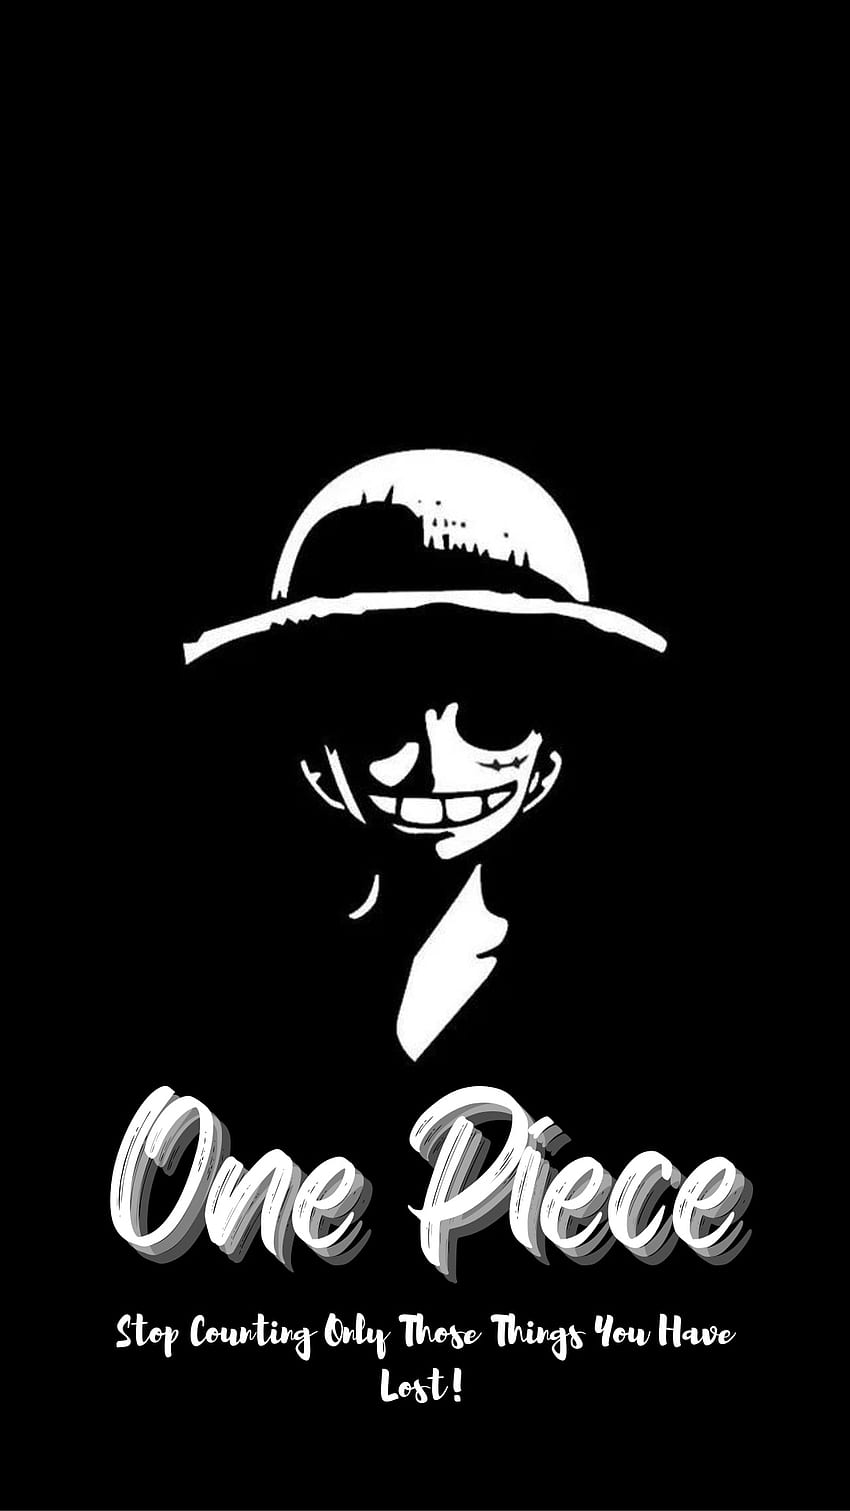 One Piece Wallpaper: One Piece  One piece quotes, One piece